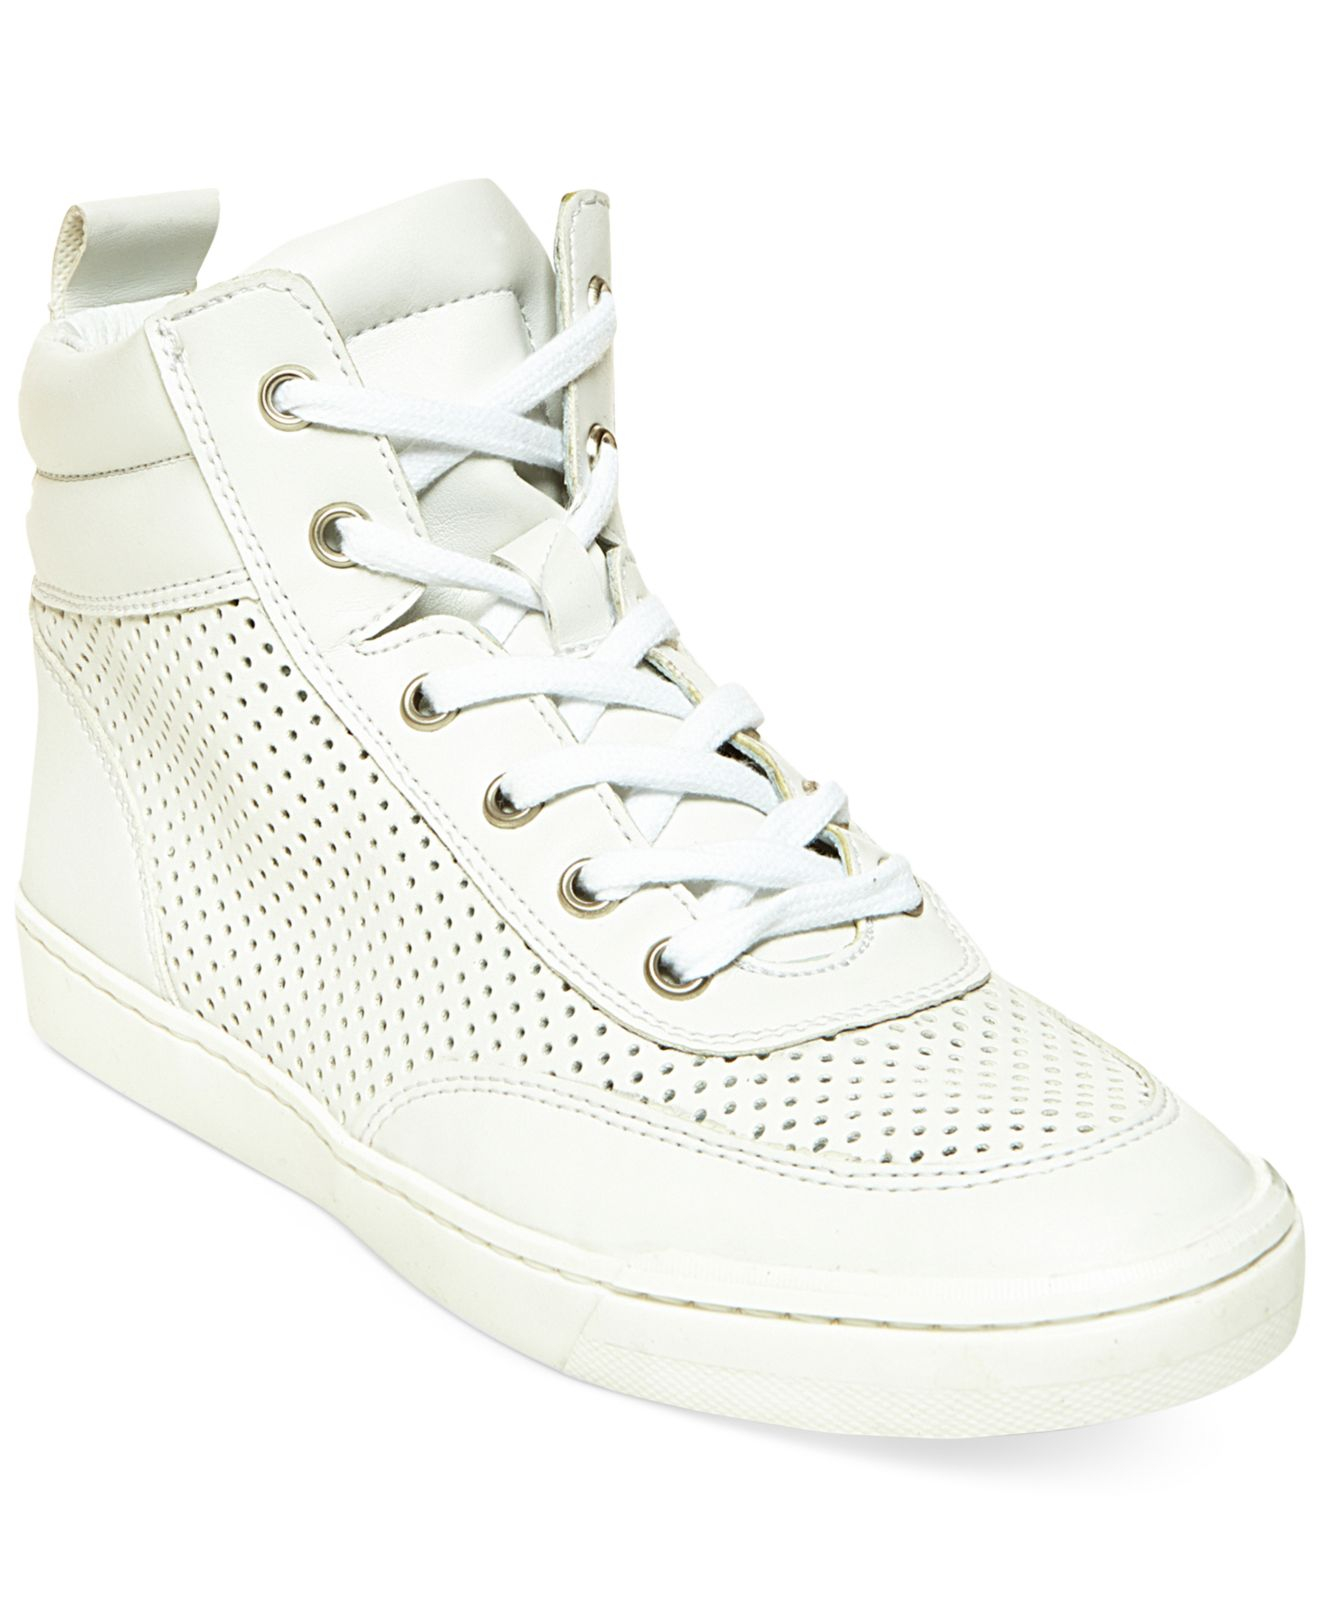 Steve Madden Women's Mikeyy High Top Sneakers in White - Lyst